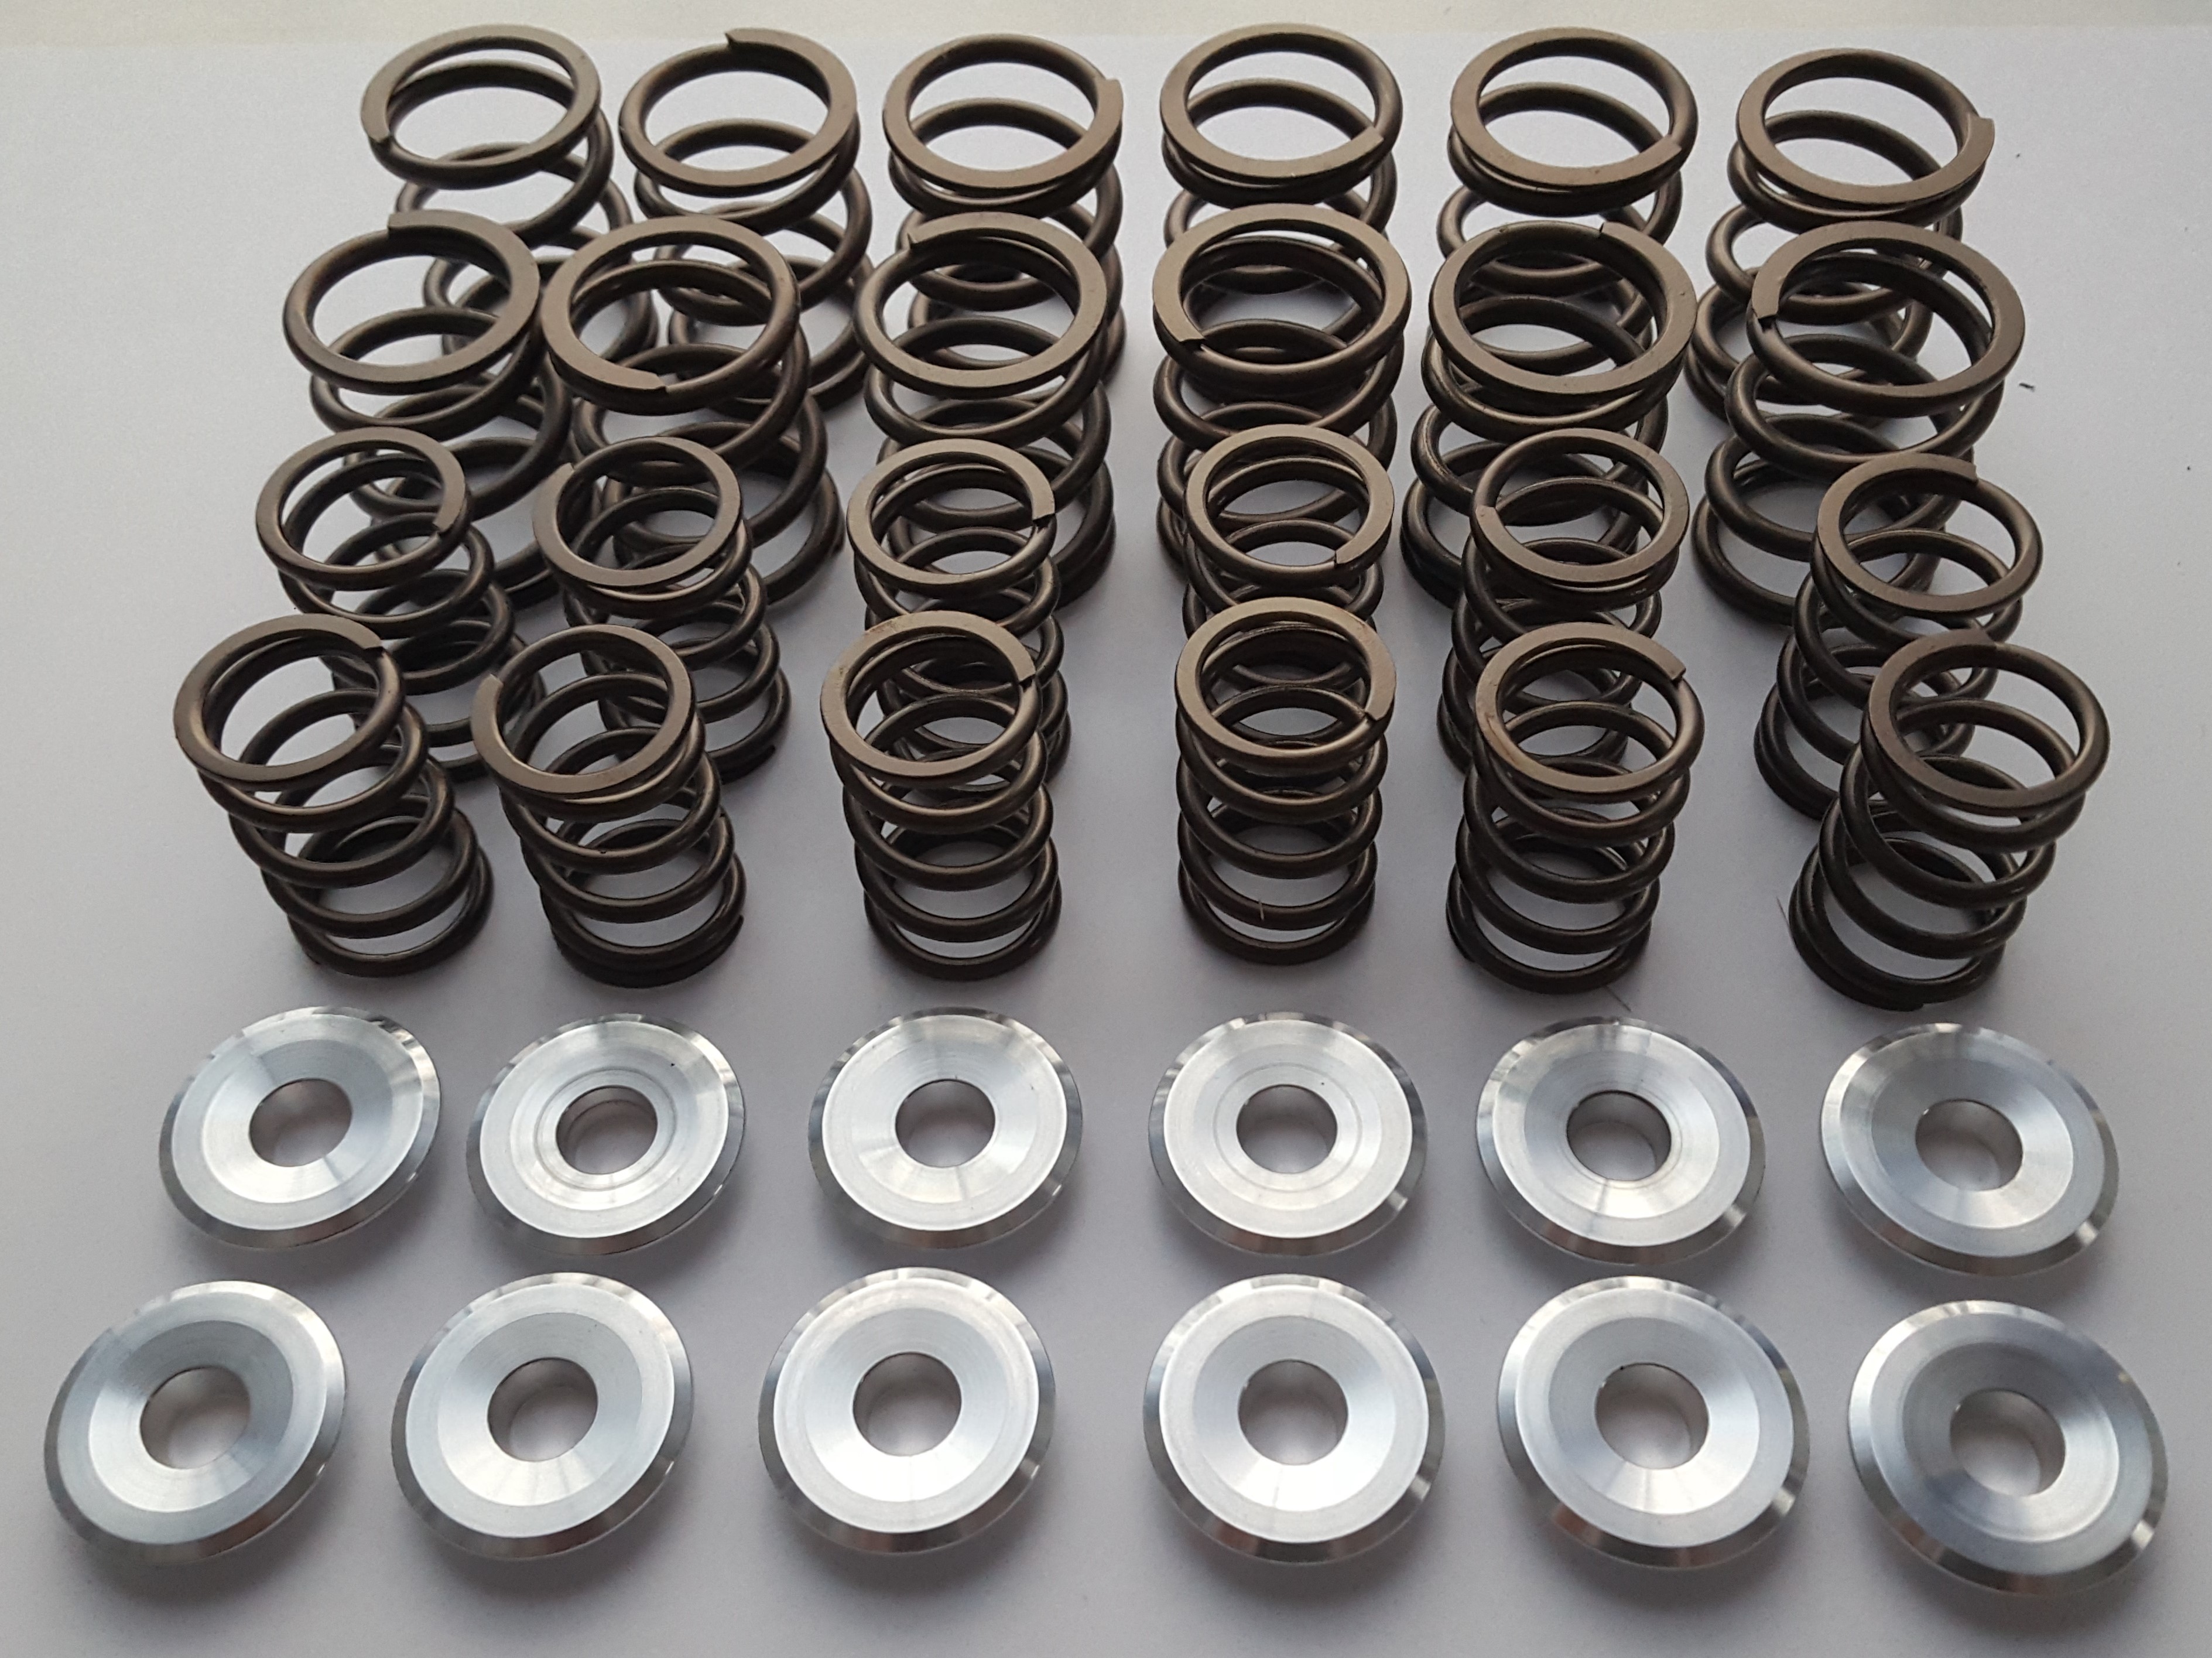 Valve spring set for Porsche  911  6-Cyl. 3,0 - 3,8 with 8mm Magnesium retainers